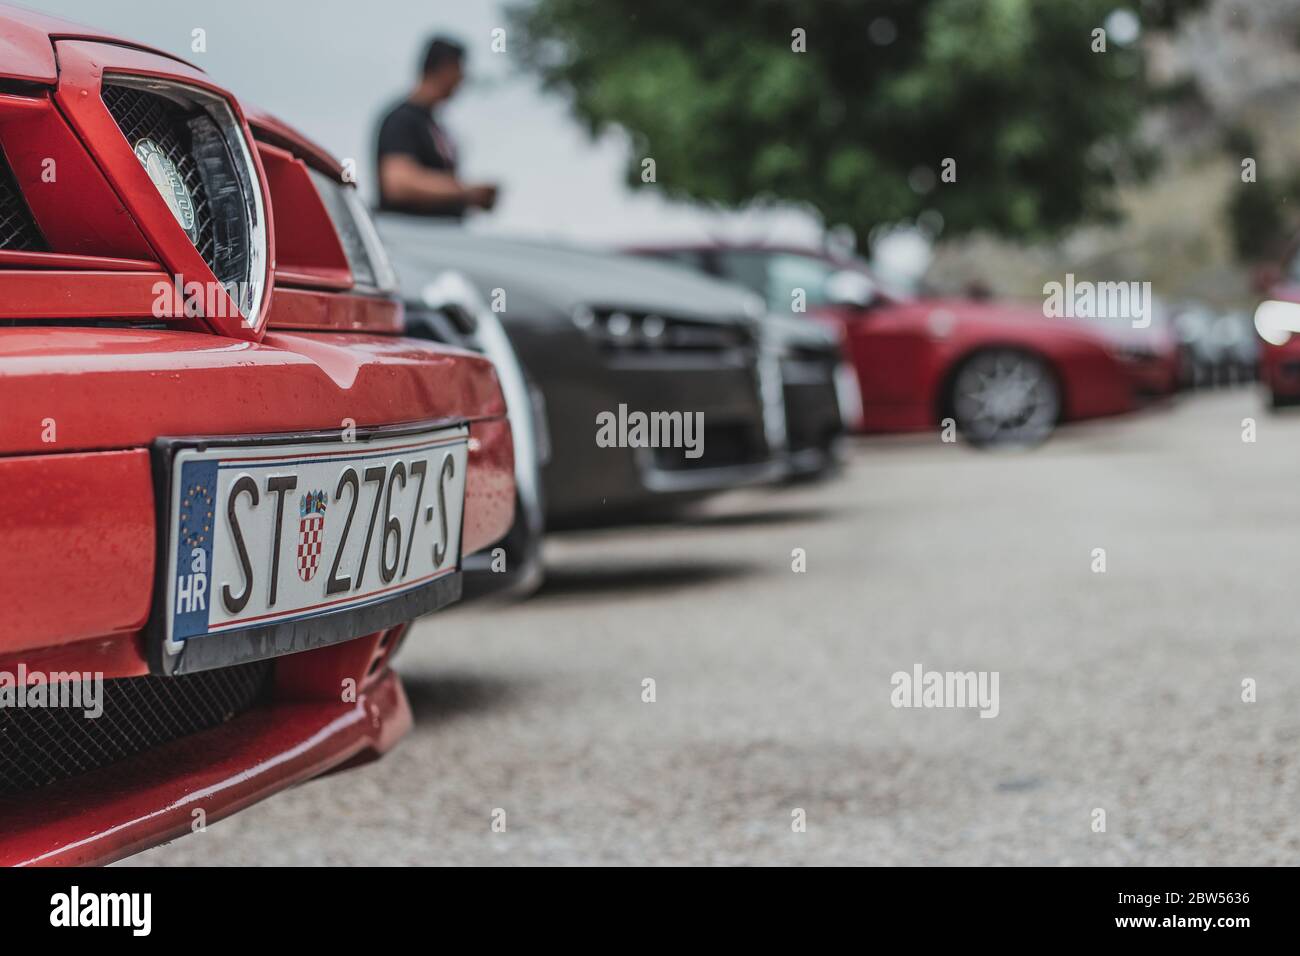 Front end and license plate of an Alfa Romeo 155, parked in a row with multiple other Alfa Romeos, part of an exhibition Stock Photo